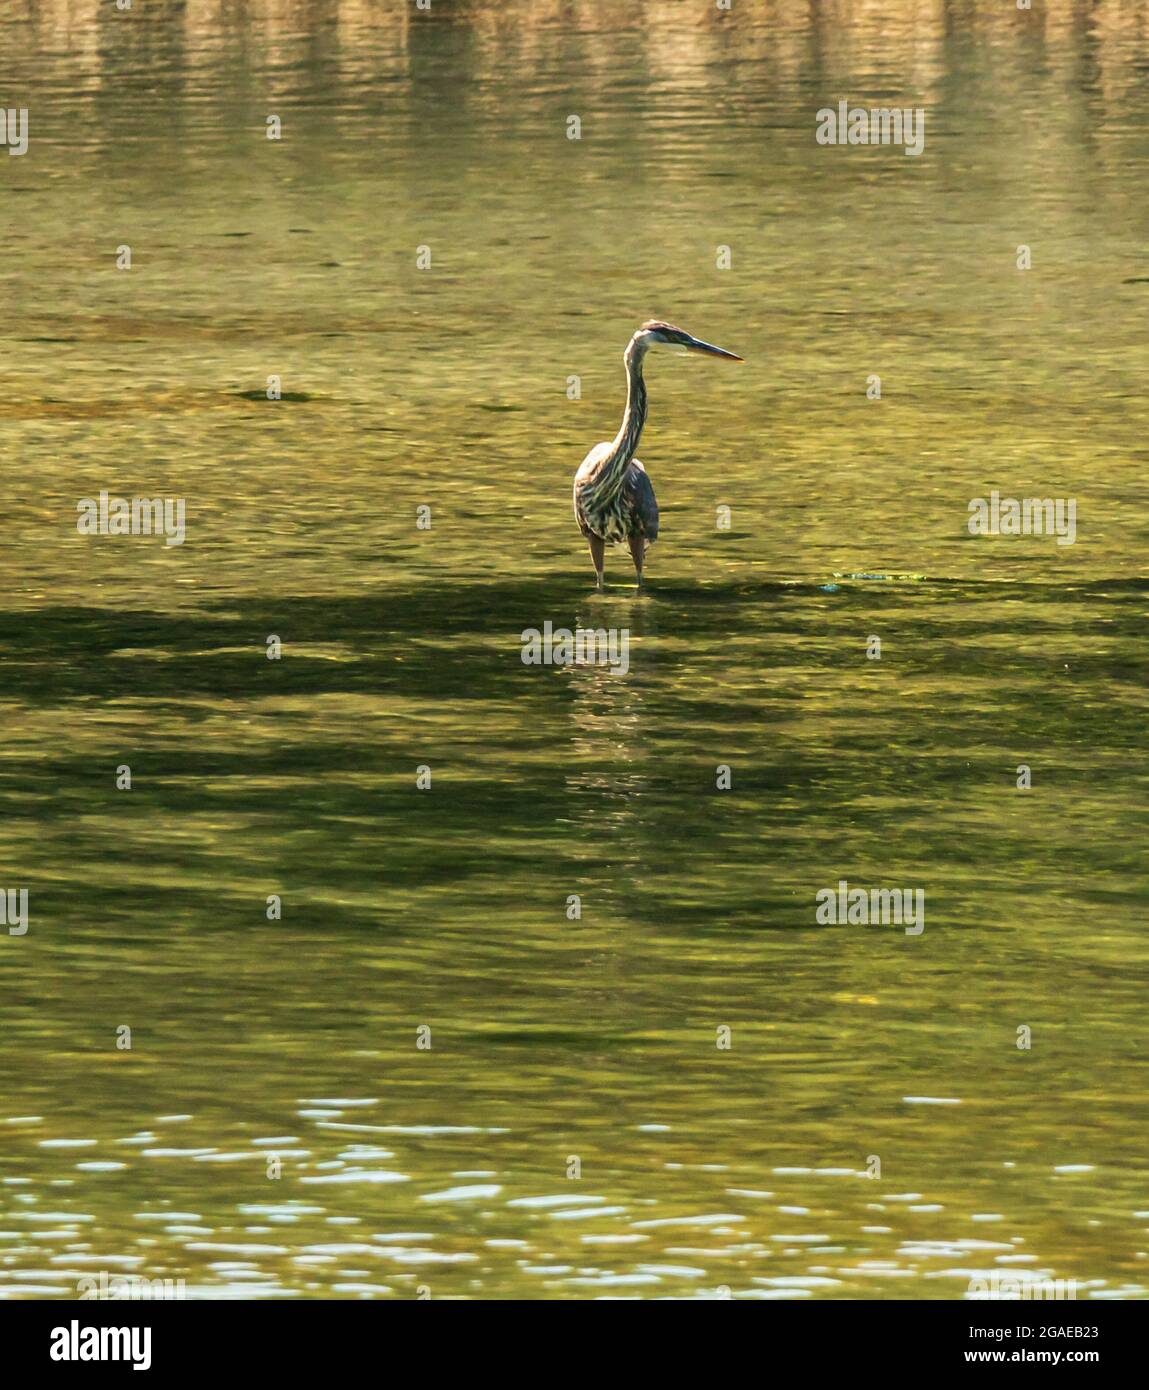 Ardea herodias, or Great Blue Heron lives year round on the BC coast. Calm water, green reflection, solitary heron standing. Stock Photo